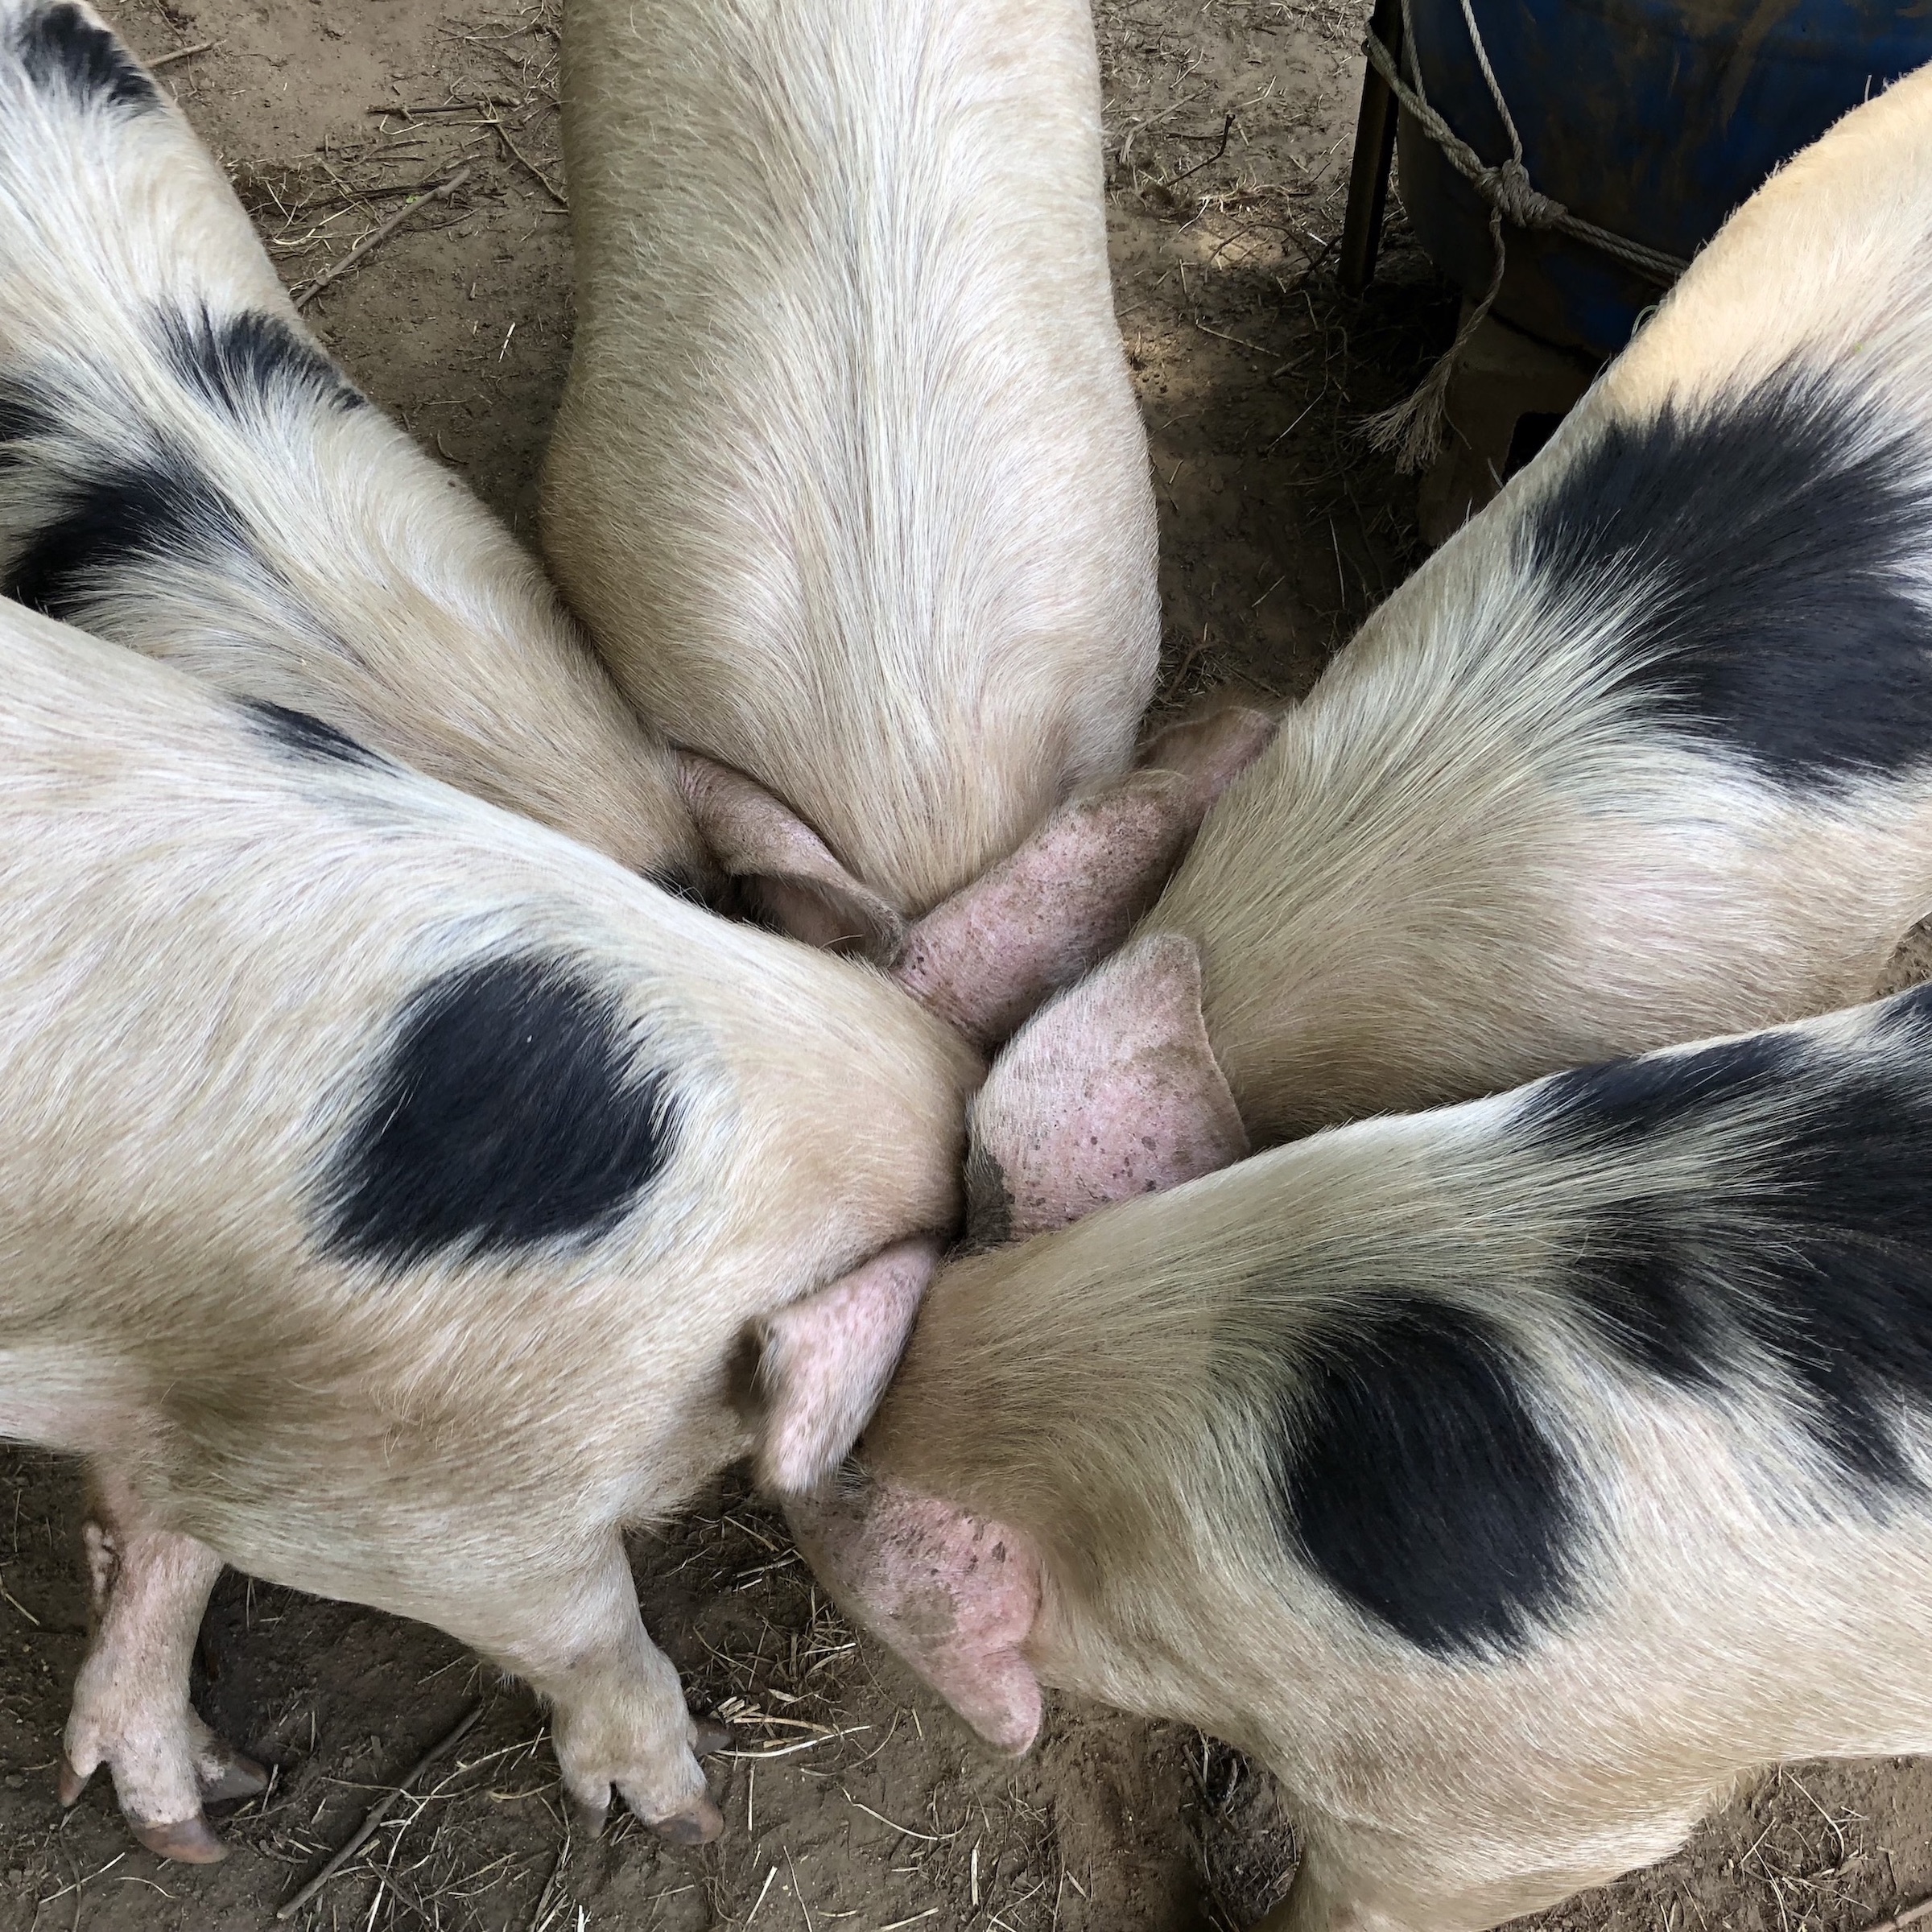 Five pigs with black patches of fur eating something in the mud.